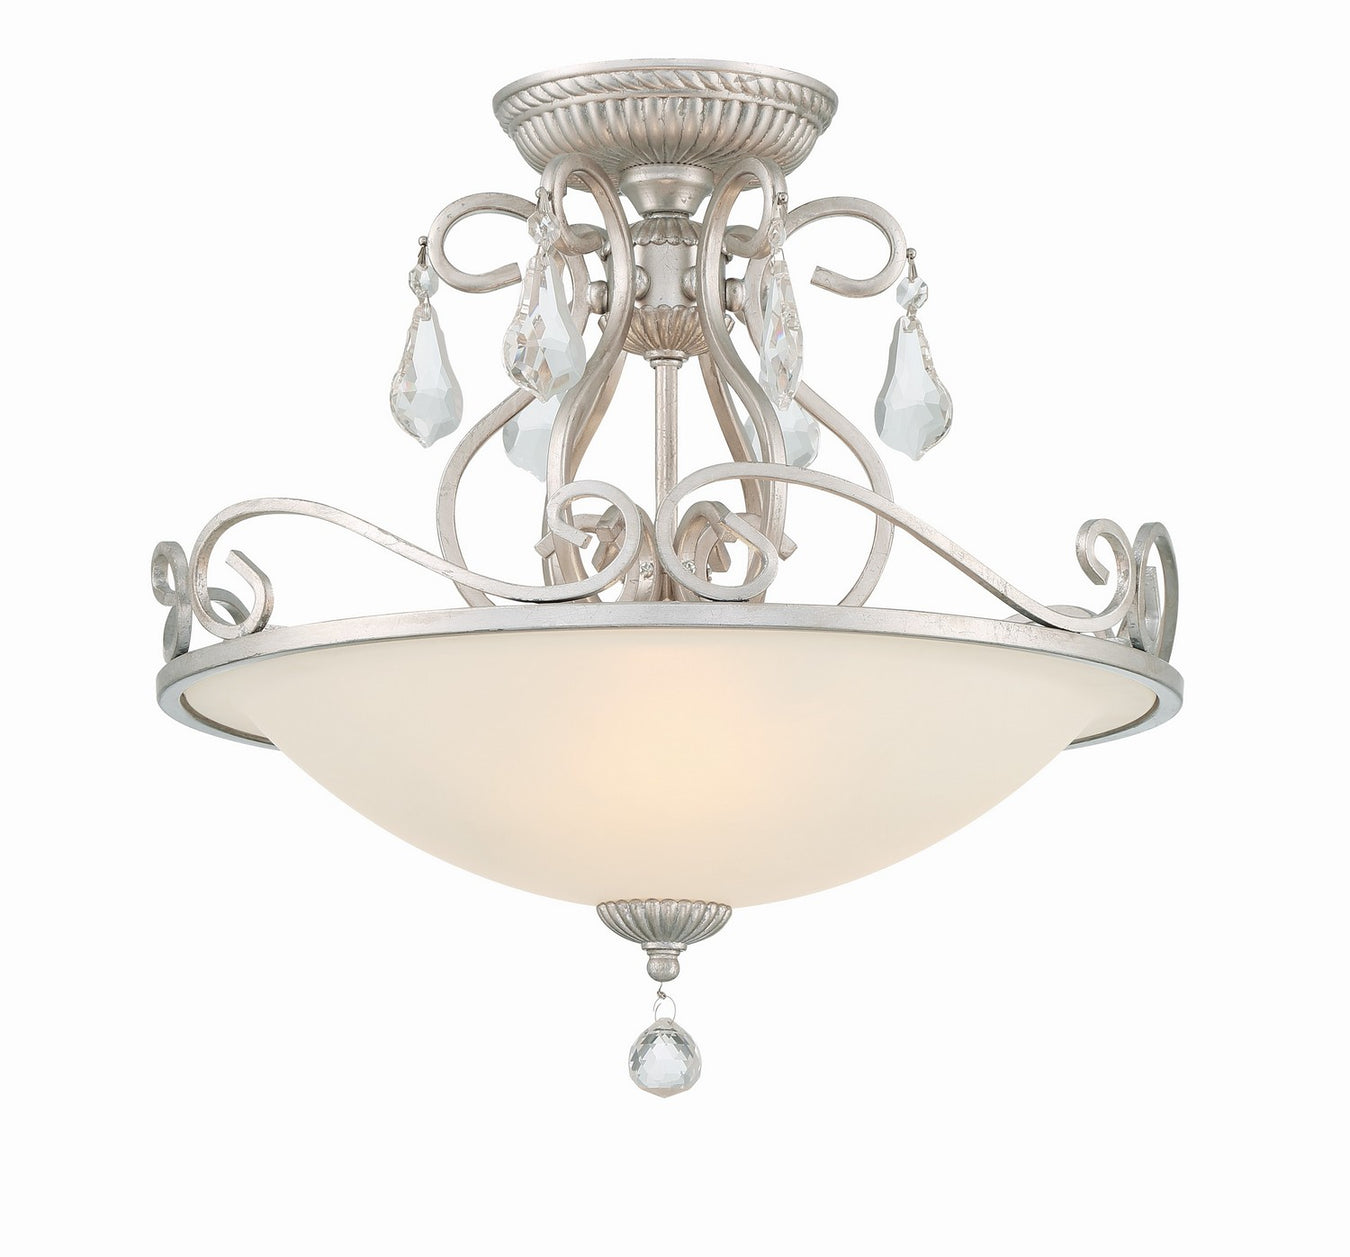 Ashton 3-Light Ceiling Mount in Olde Silver by Crystorama - MPN 5010-OS-CL-S